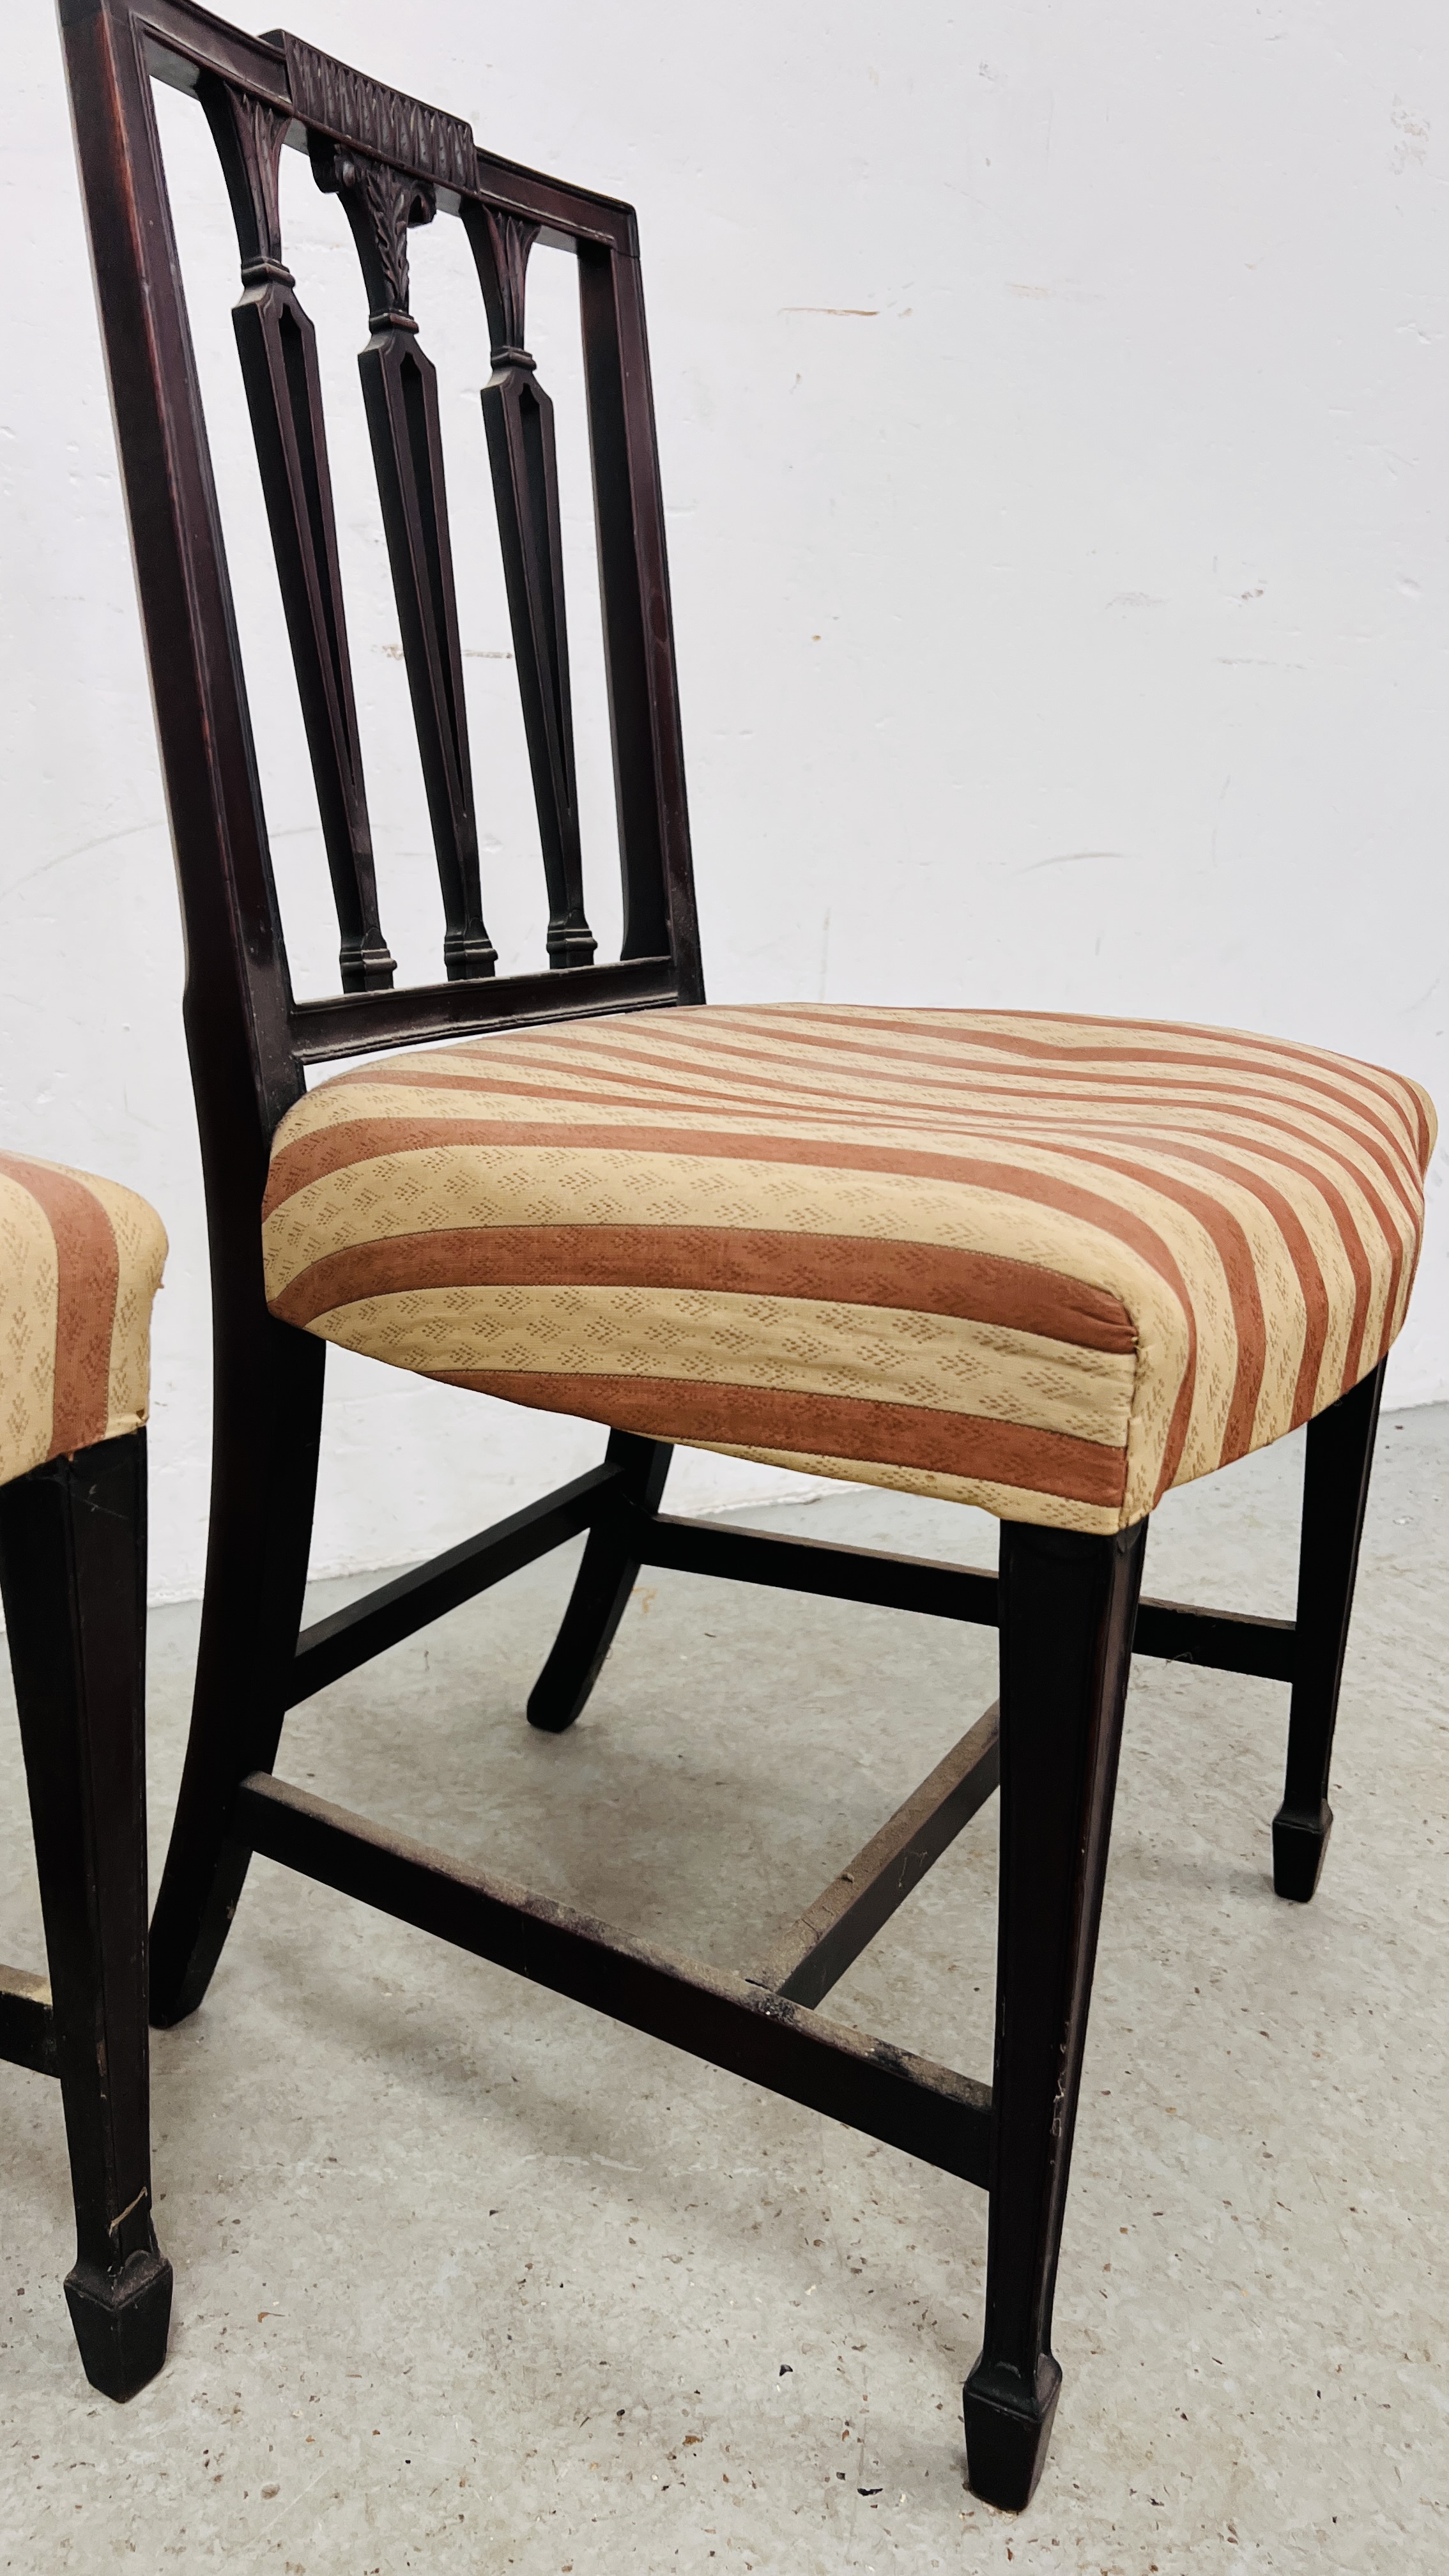 A PAIR OF GEORGE III MAHOGANY DINING CHAIRS IN HEPPLEWHITE STYLE (PINK STRIPED SEATS) - Image 11 of 13